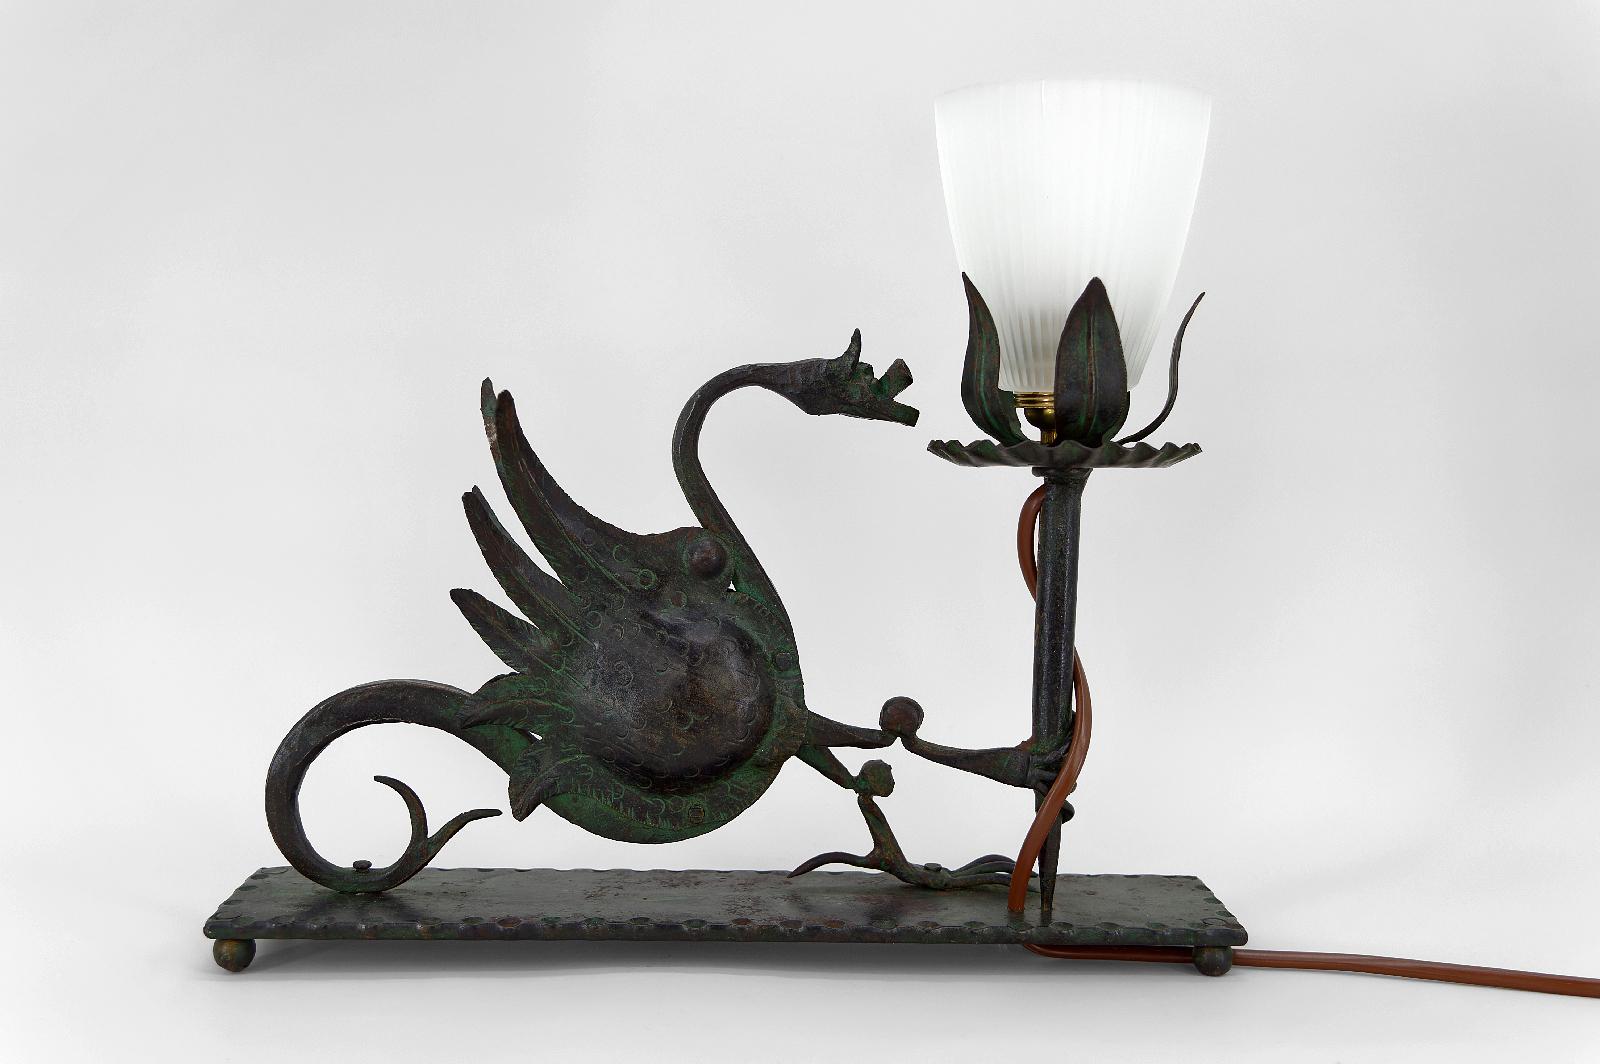 Elegant table / desk lamp in wrought iron, figuring a winged dragon holding a torch / torchiere. 

Beautiful metal work: subject well done, beautiful verdigris patina.

Neo-Gothic / Gothic Revival / Art Nouveau style, Italy, circa